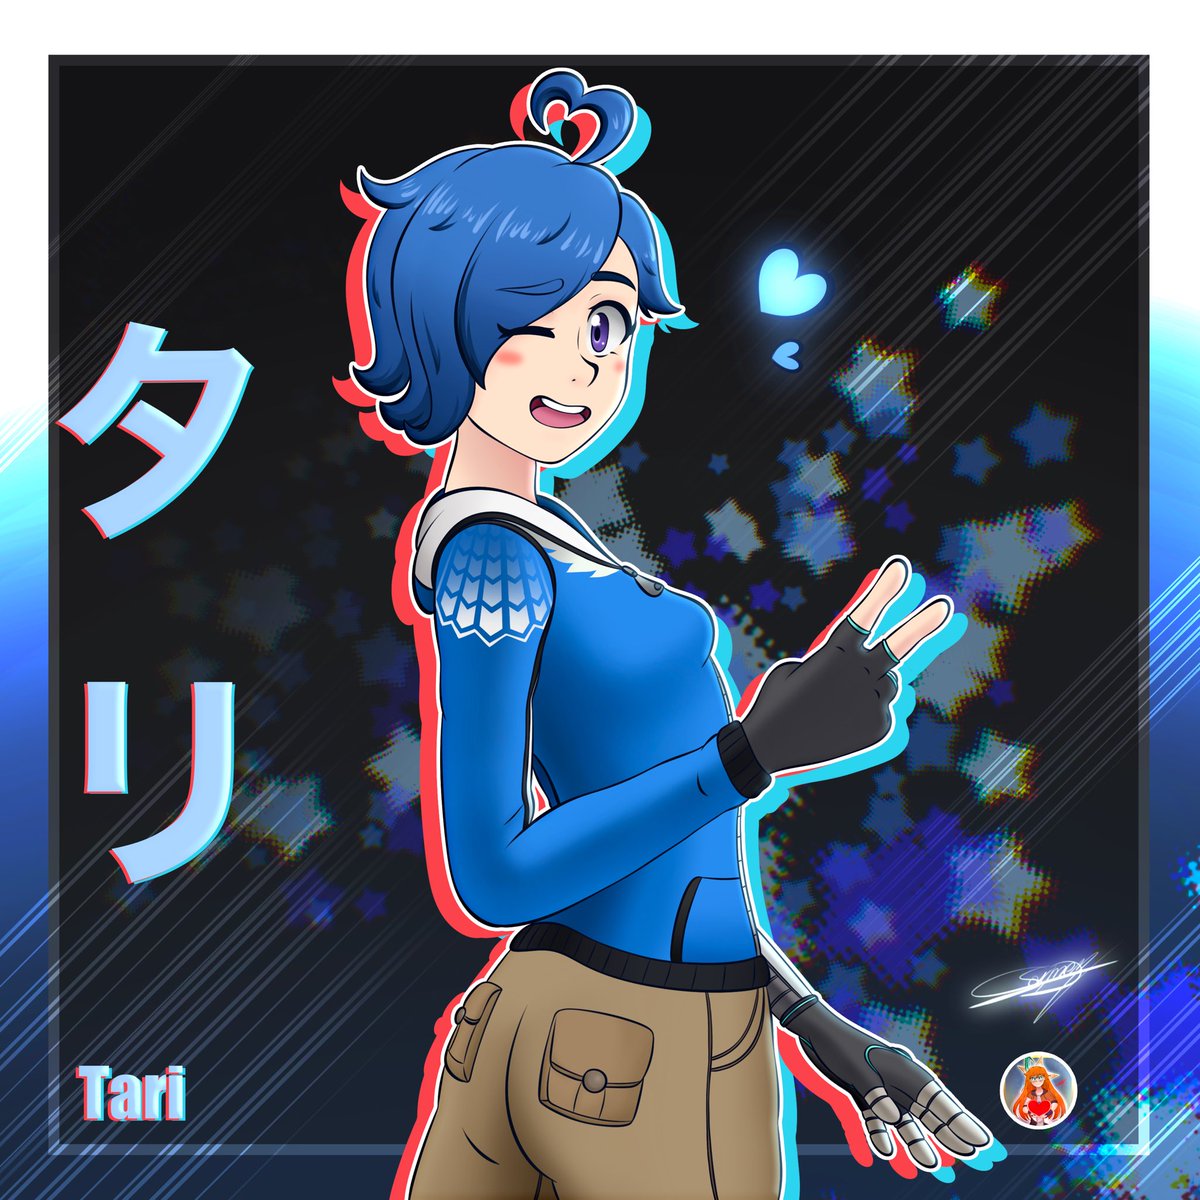 This is my drawing for my redesign of Tari : hope you will enjoy it !! 💙⭐️💙⭐️

@CelesteNotleyS 
@smg4official 
@glitch_prod
@kevdevz 
@Not_Jame 

#tari #redesign #smg4 #smg4fanart #Smg4tari #fanart #blue #metarunner #cute #photoshop #art #artist #procreate #anime #manga